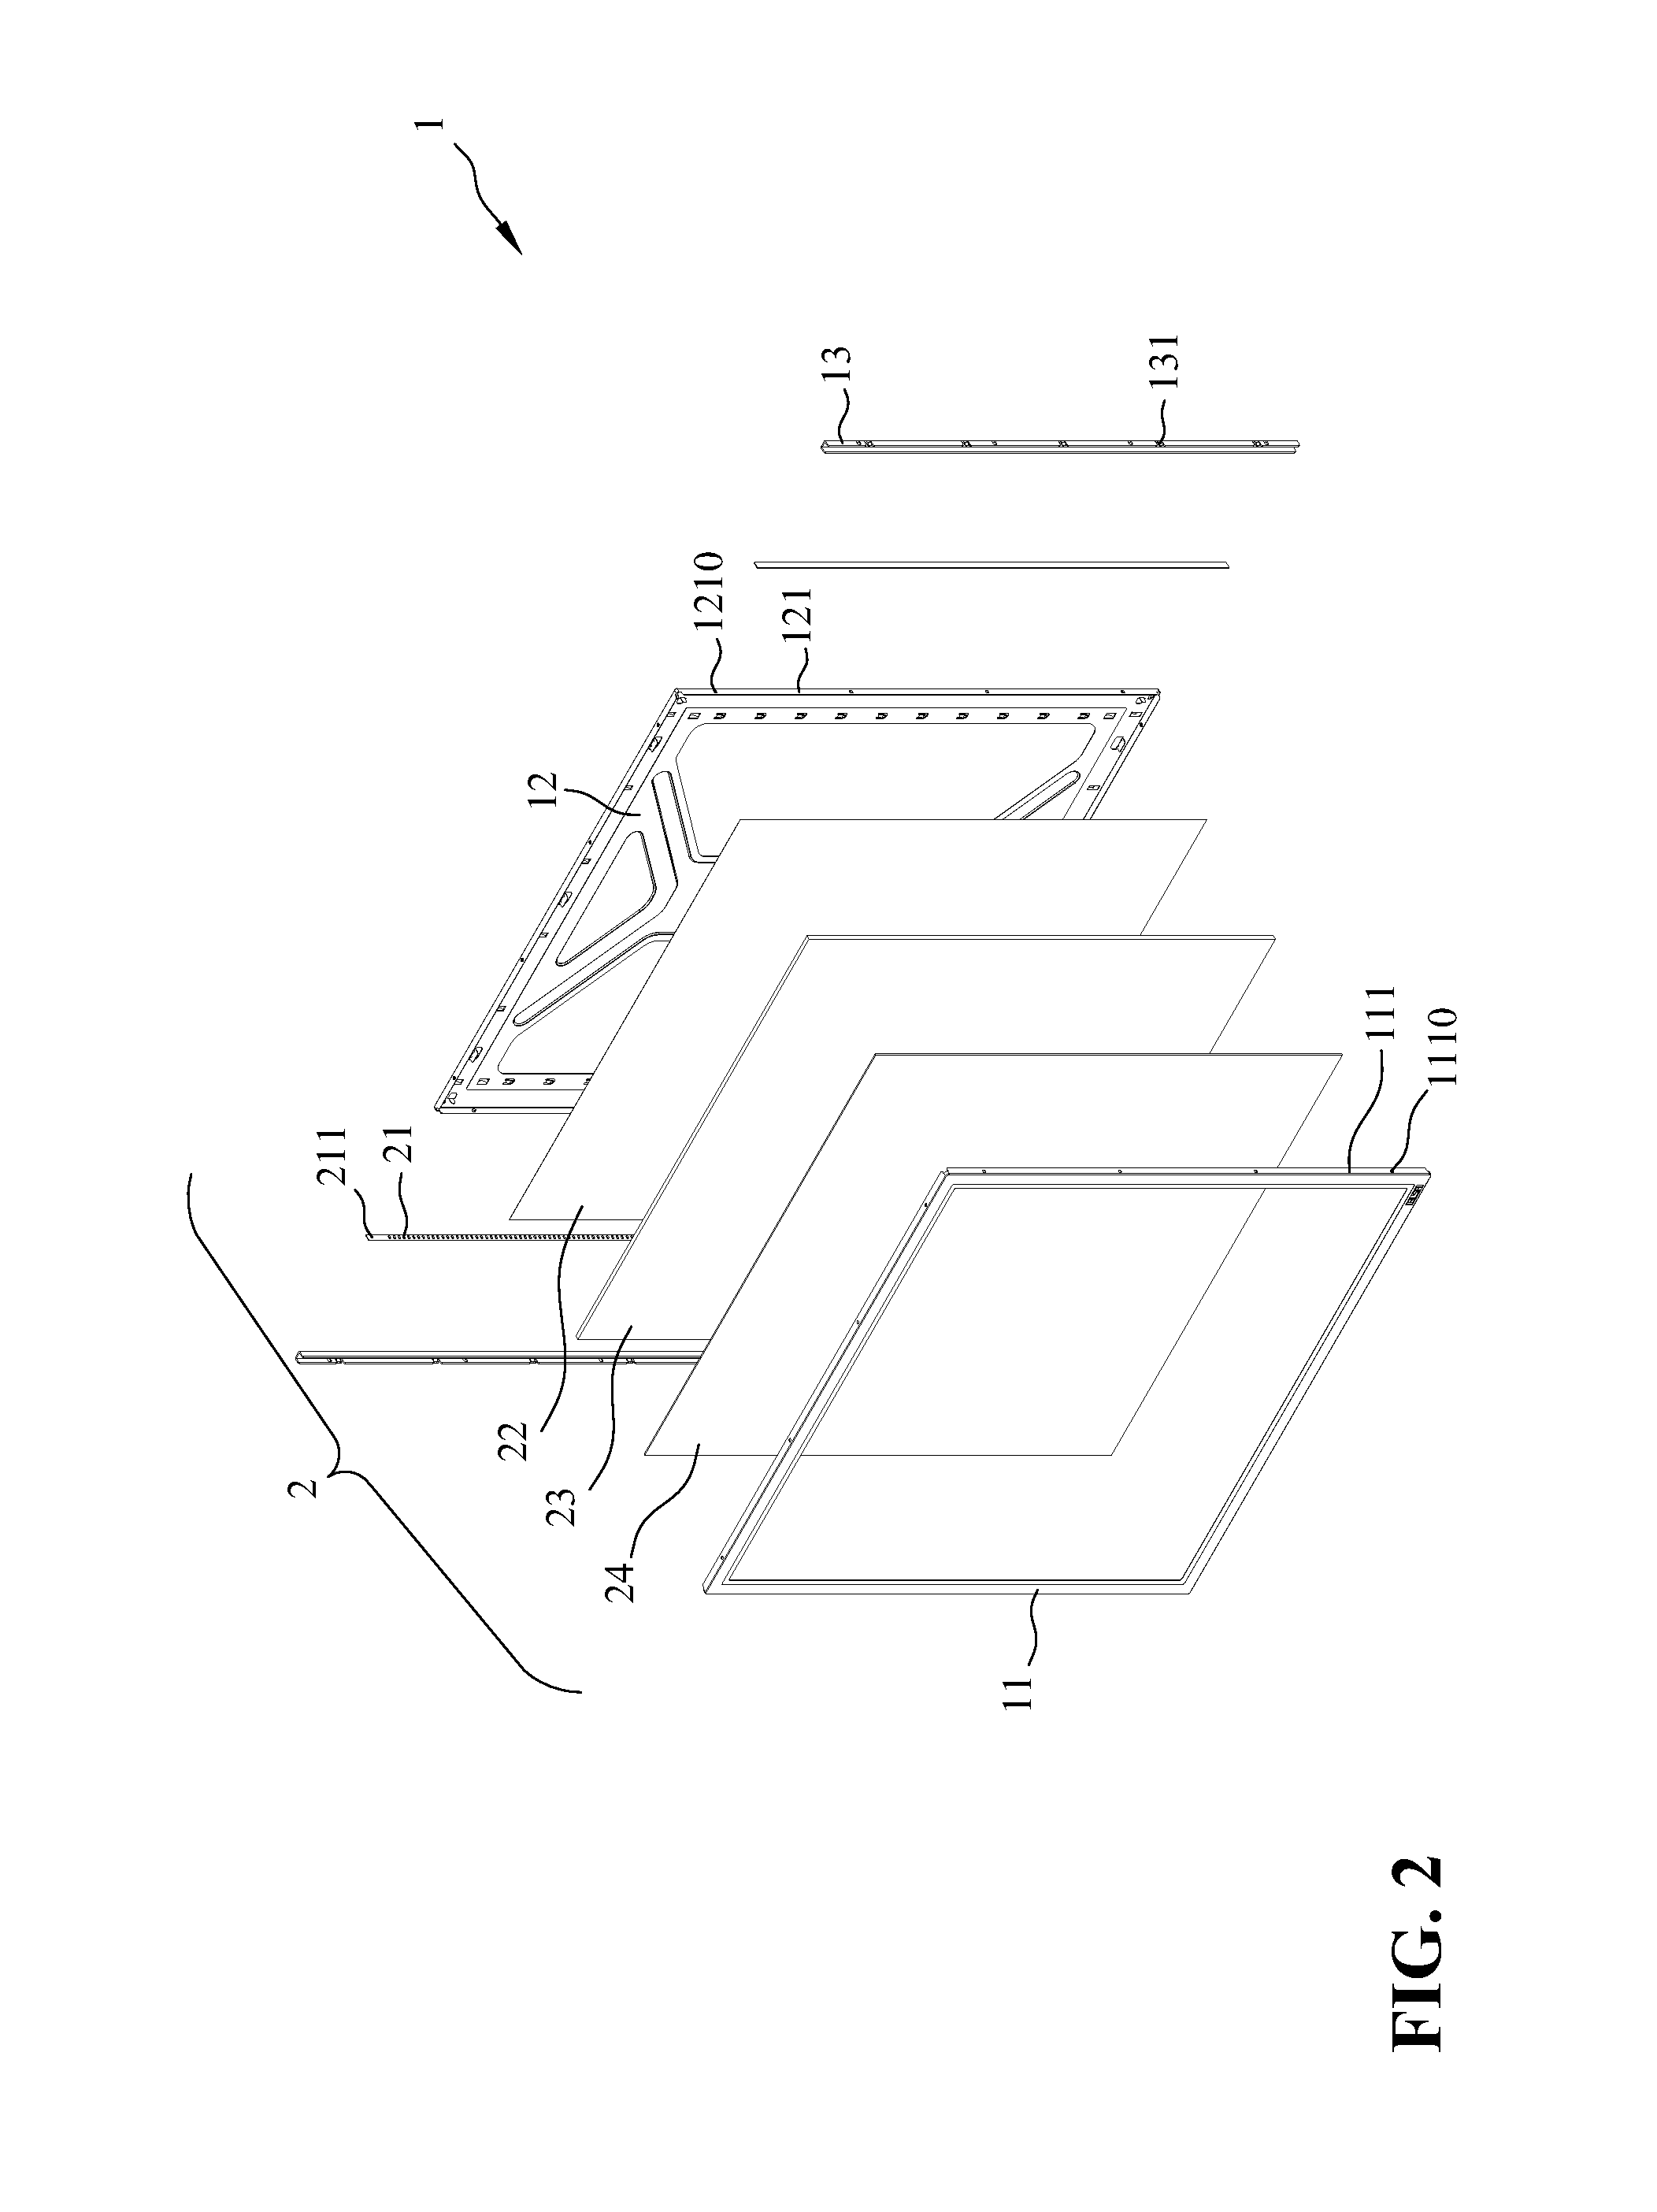 Ceiling mount lamp having a fixing structure capable of assisting heat dissipation